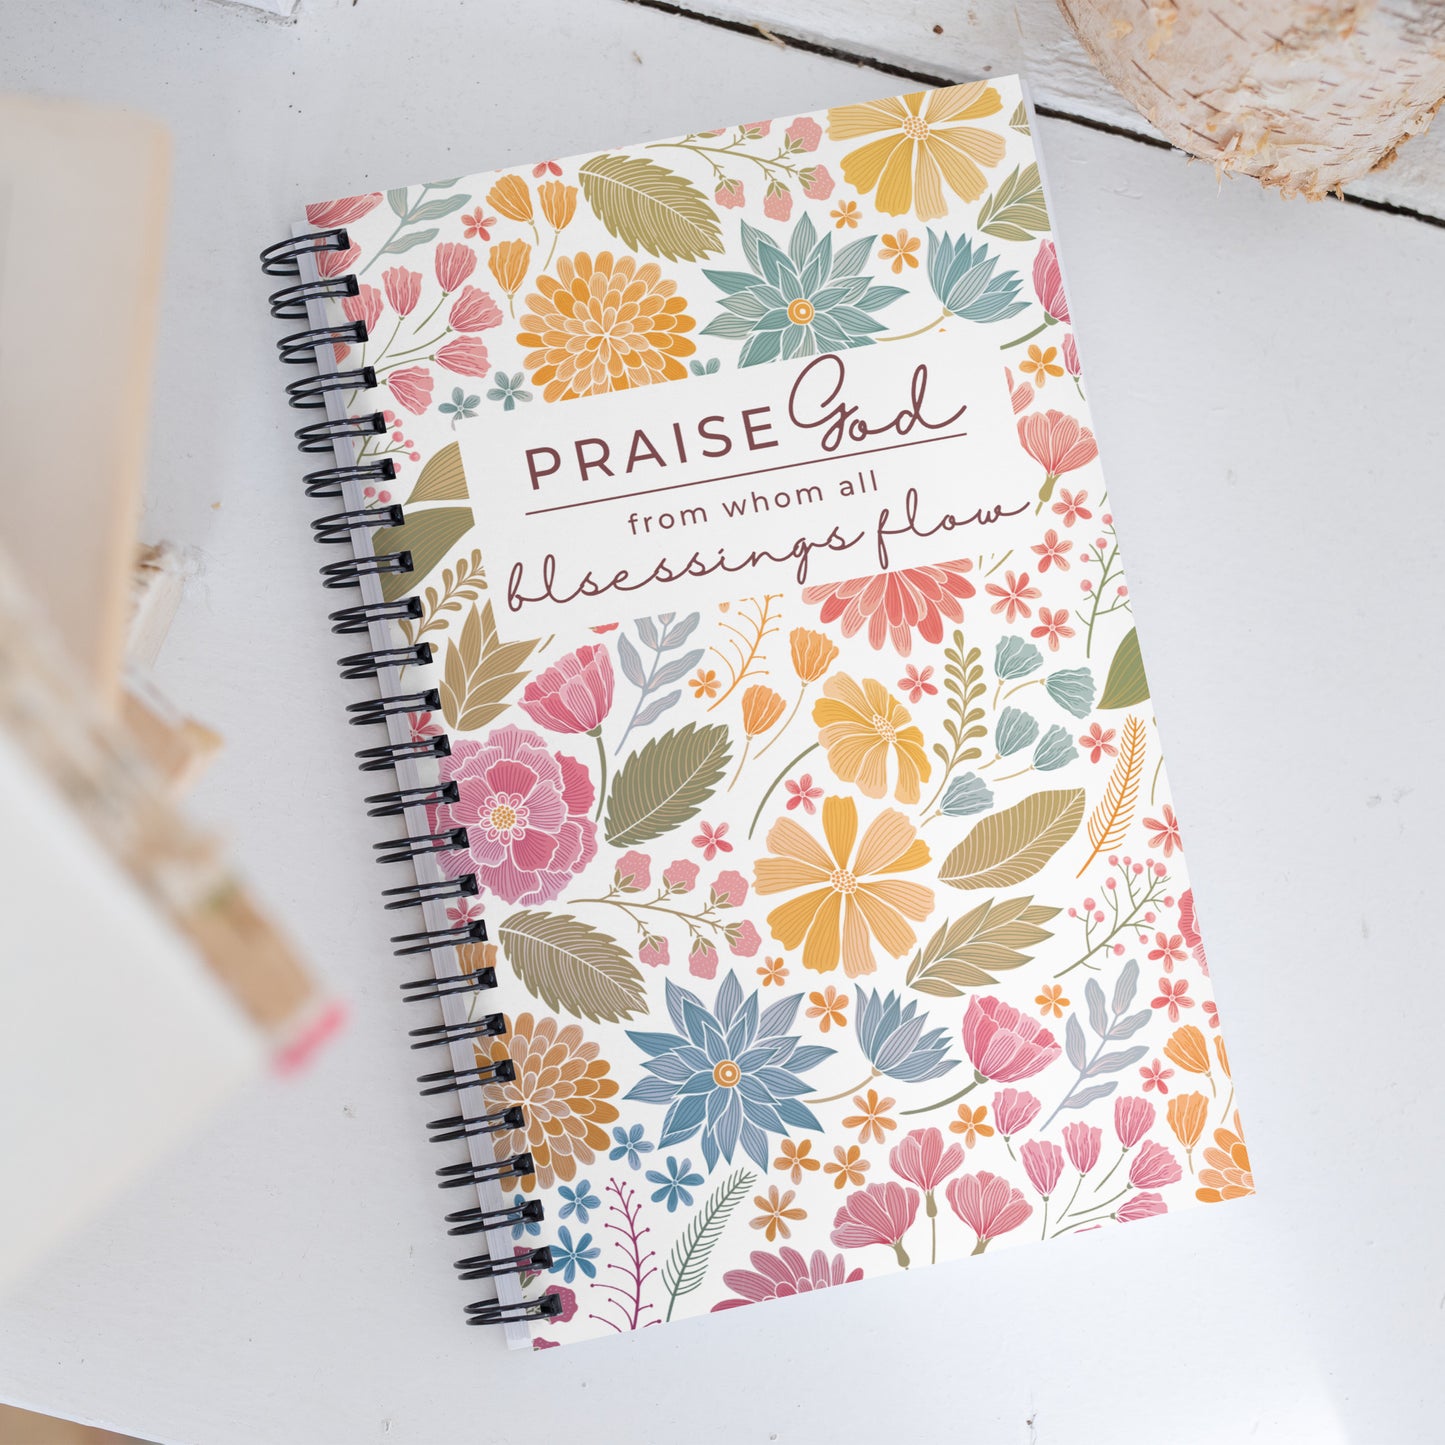 Praise God from whom all Blessings Flow Spiral notebook